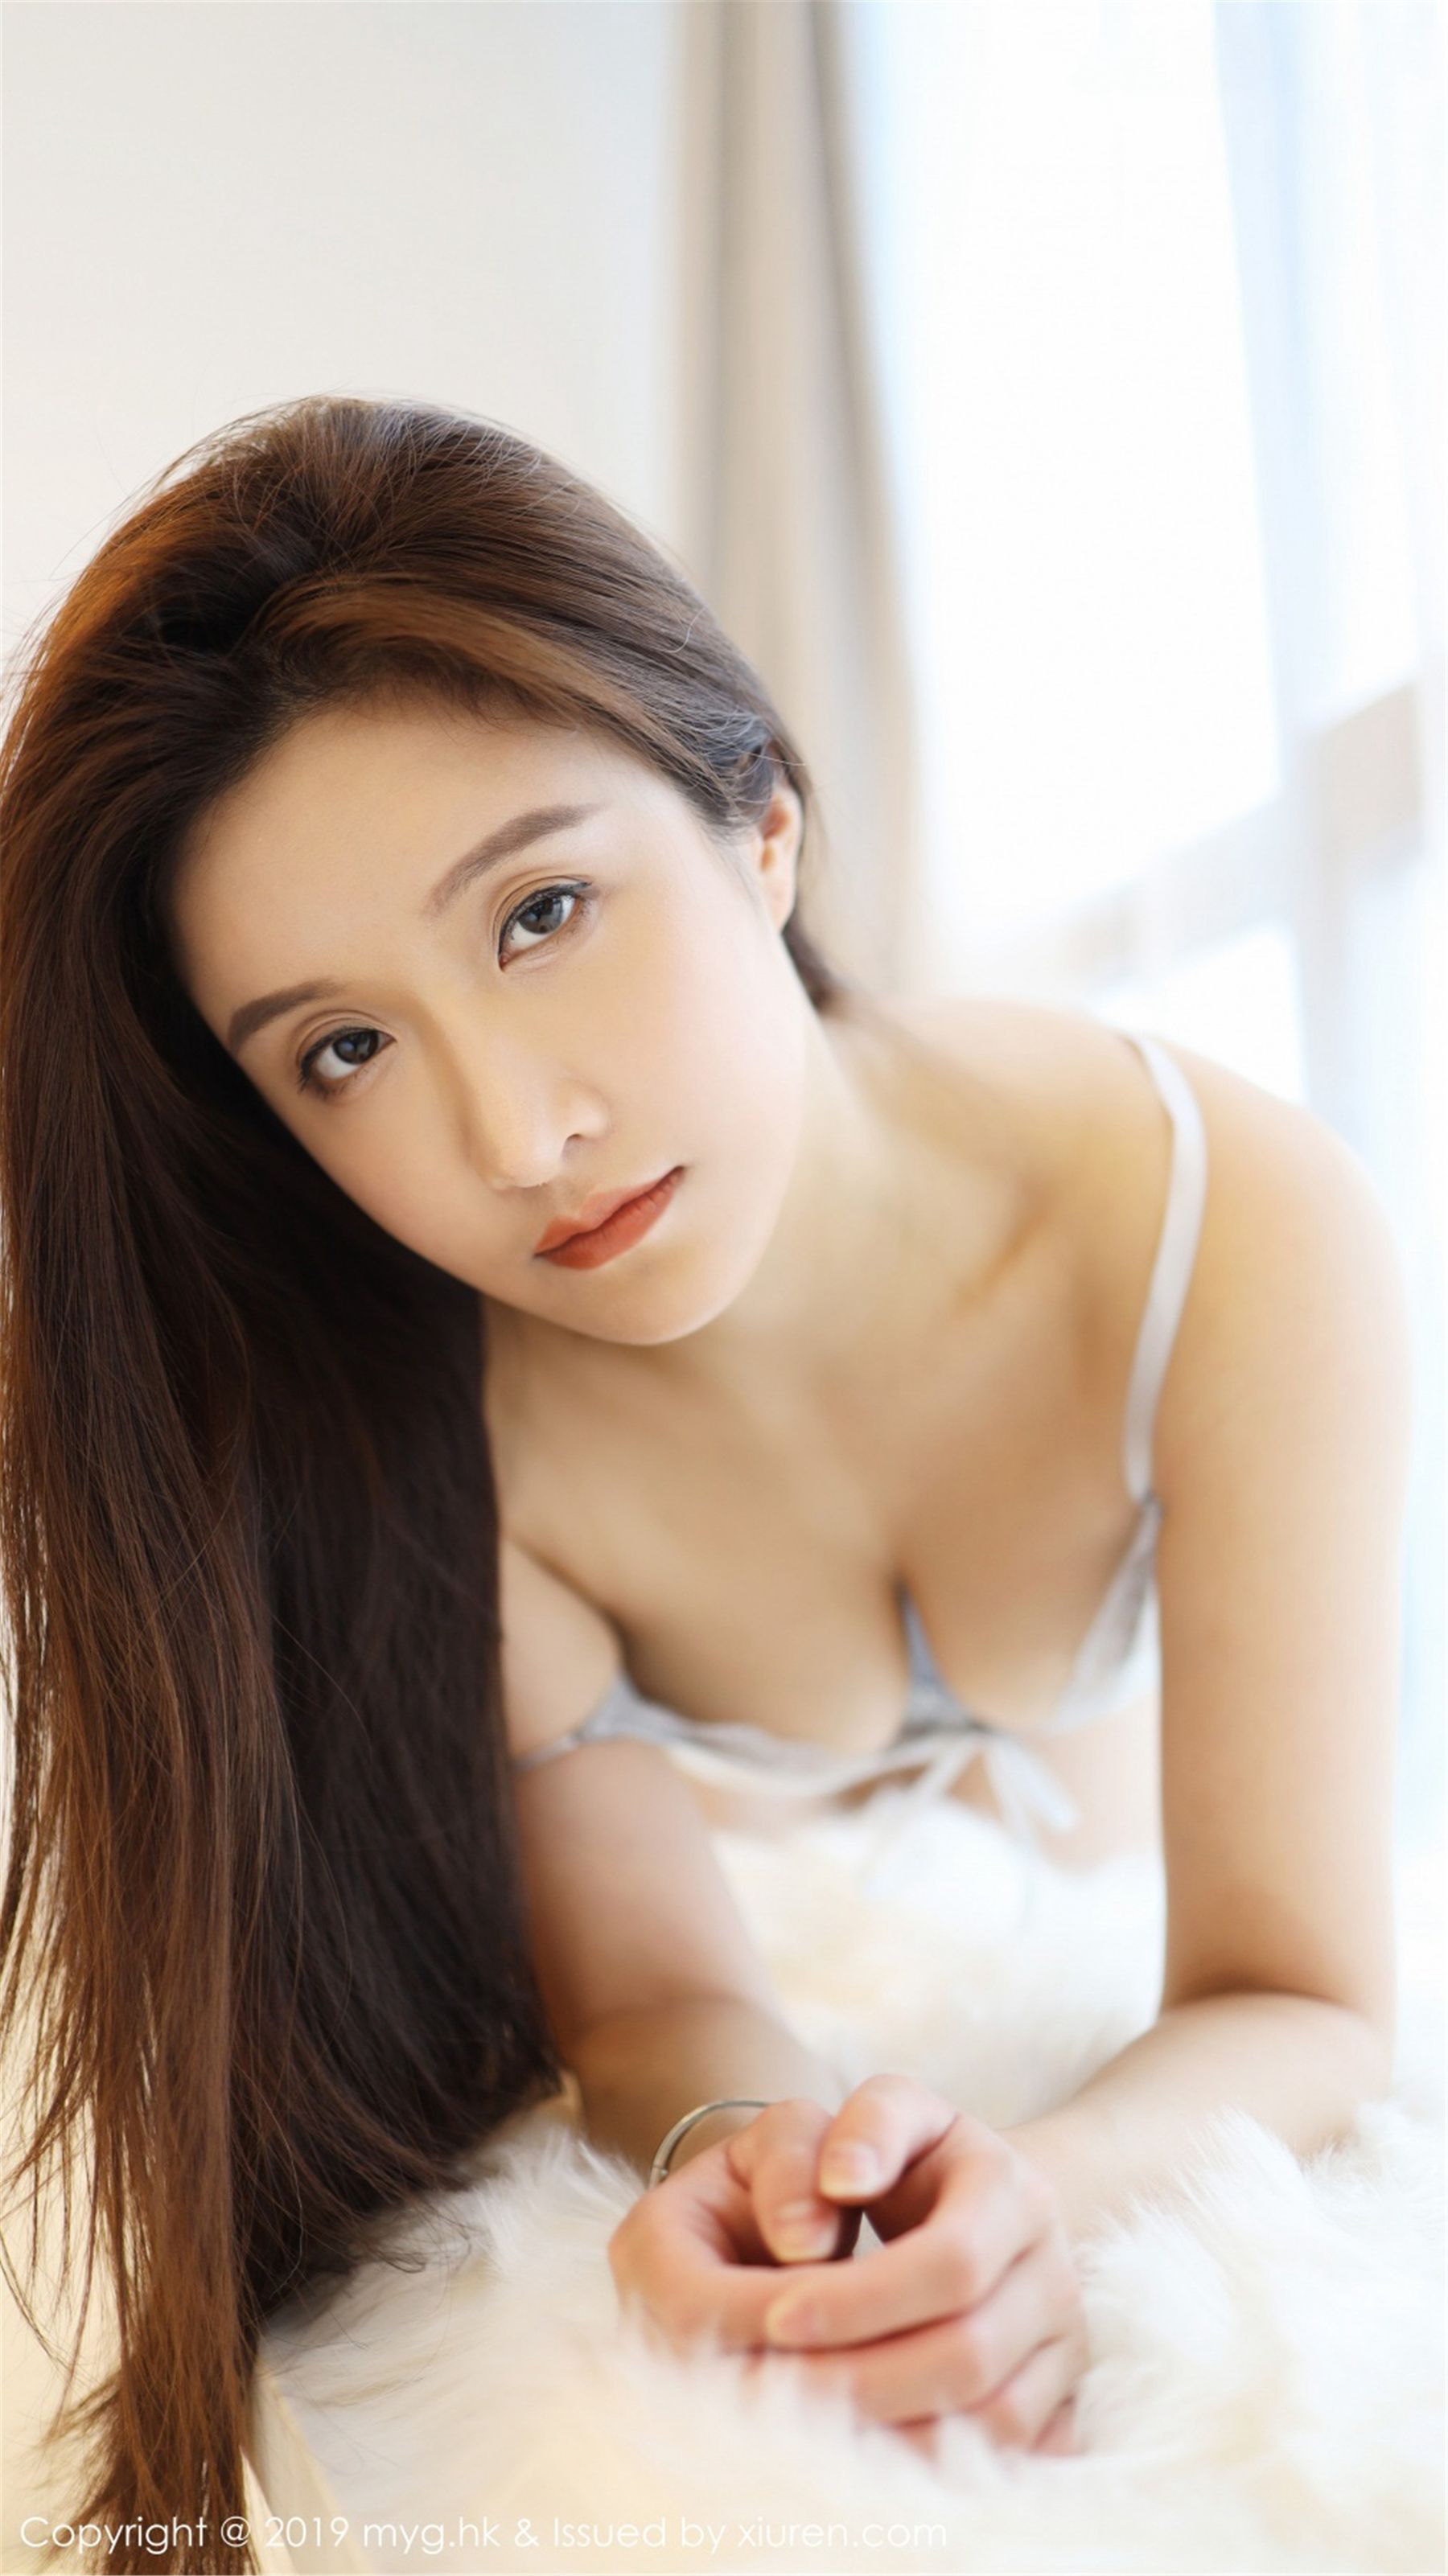 Ren Yingying’s “Bumpy and Chic Figure with Big Breasts and Big Breasts” (MyGirl) Vol.372 Photo Album